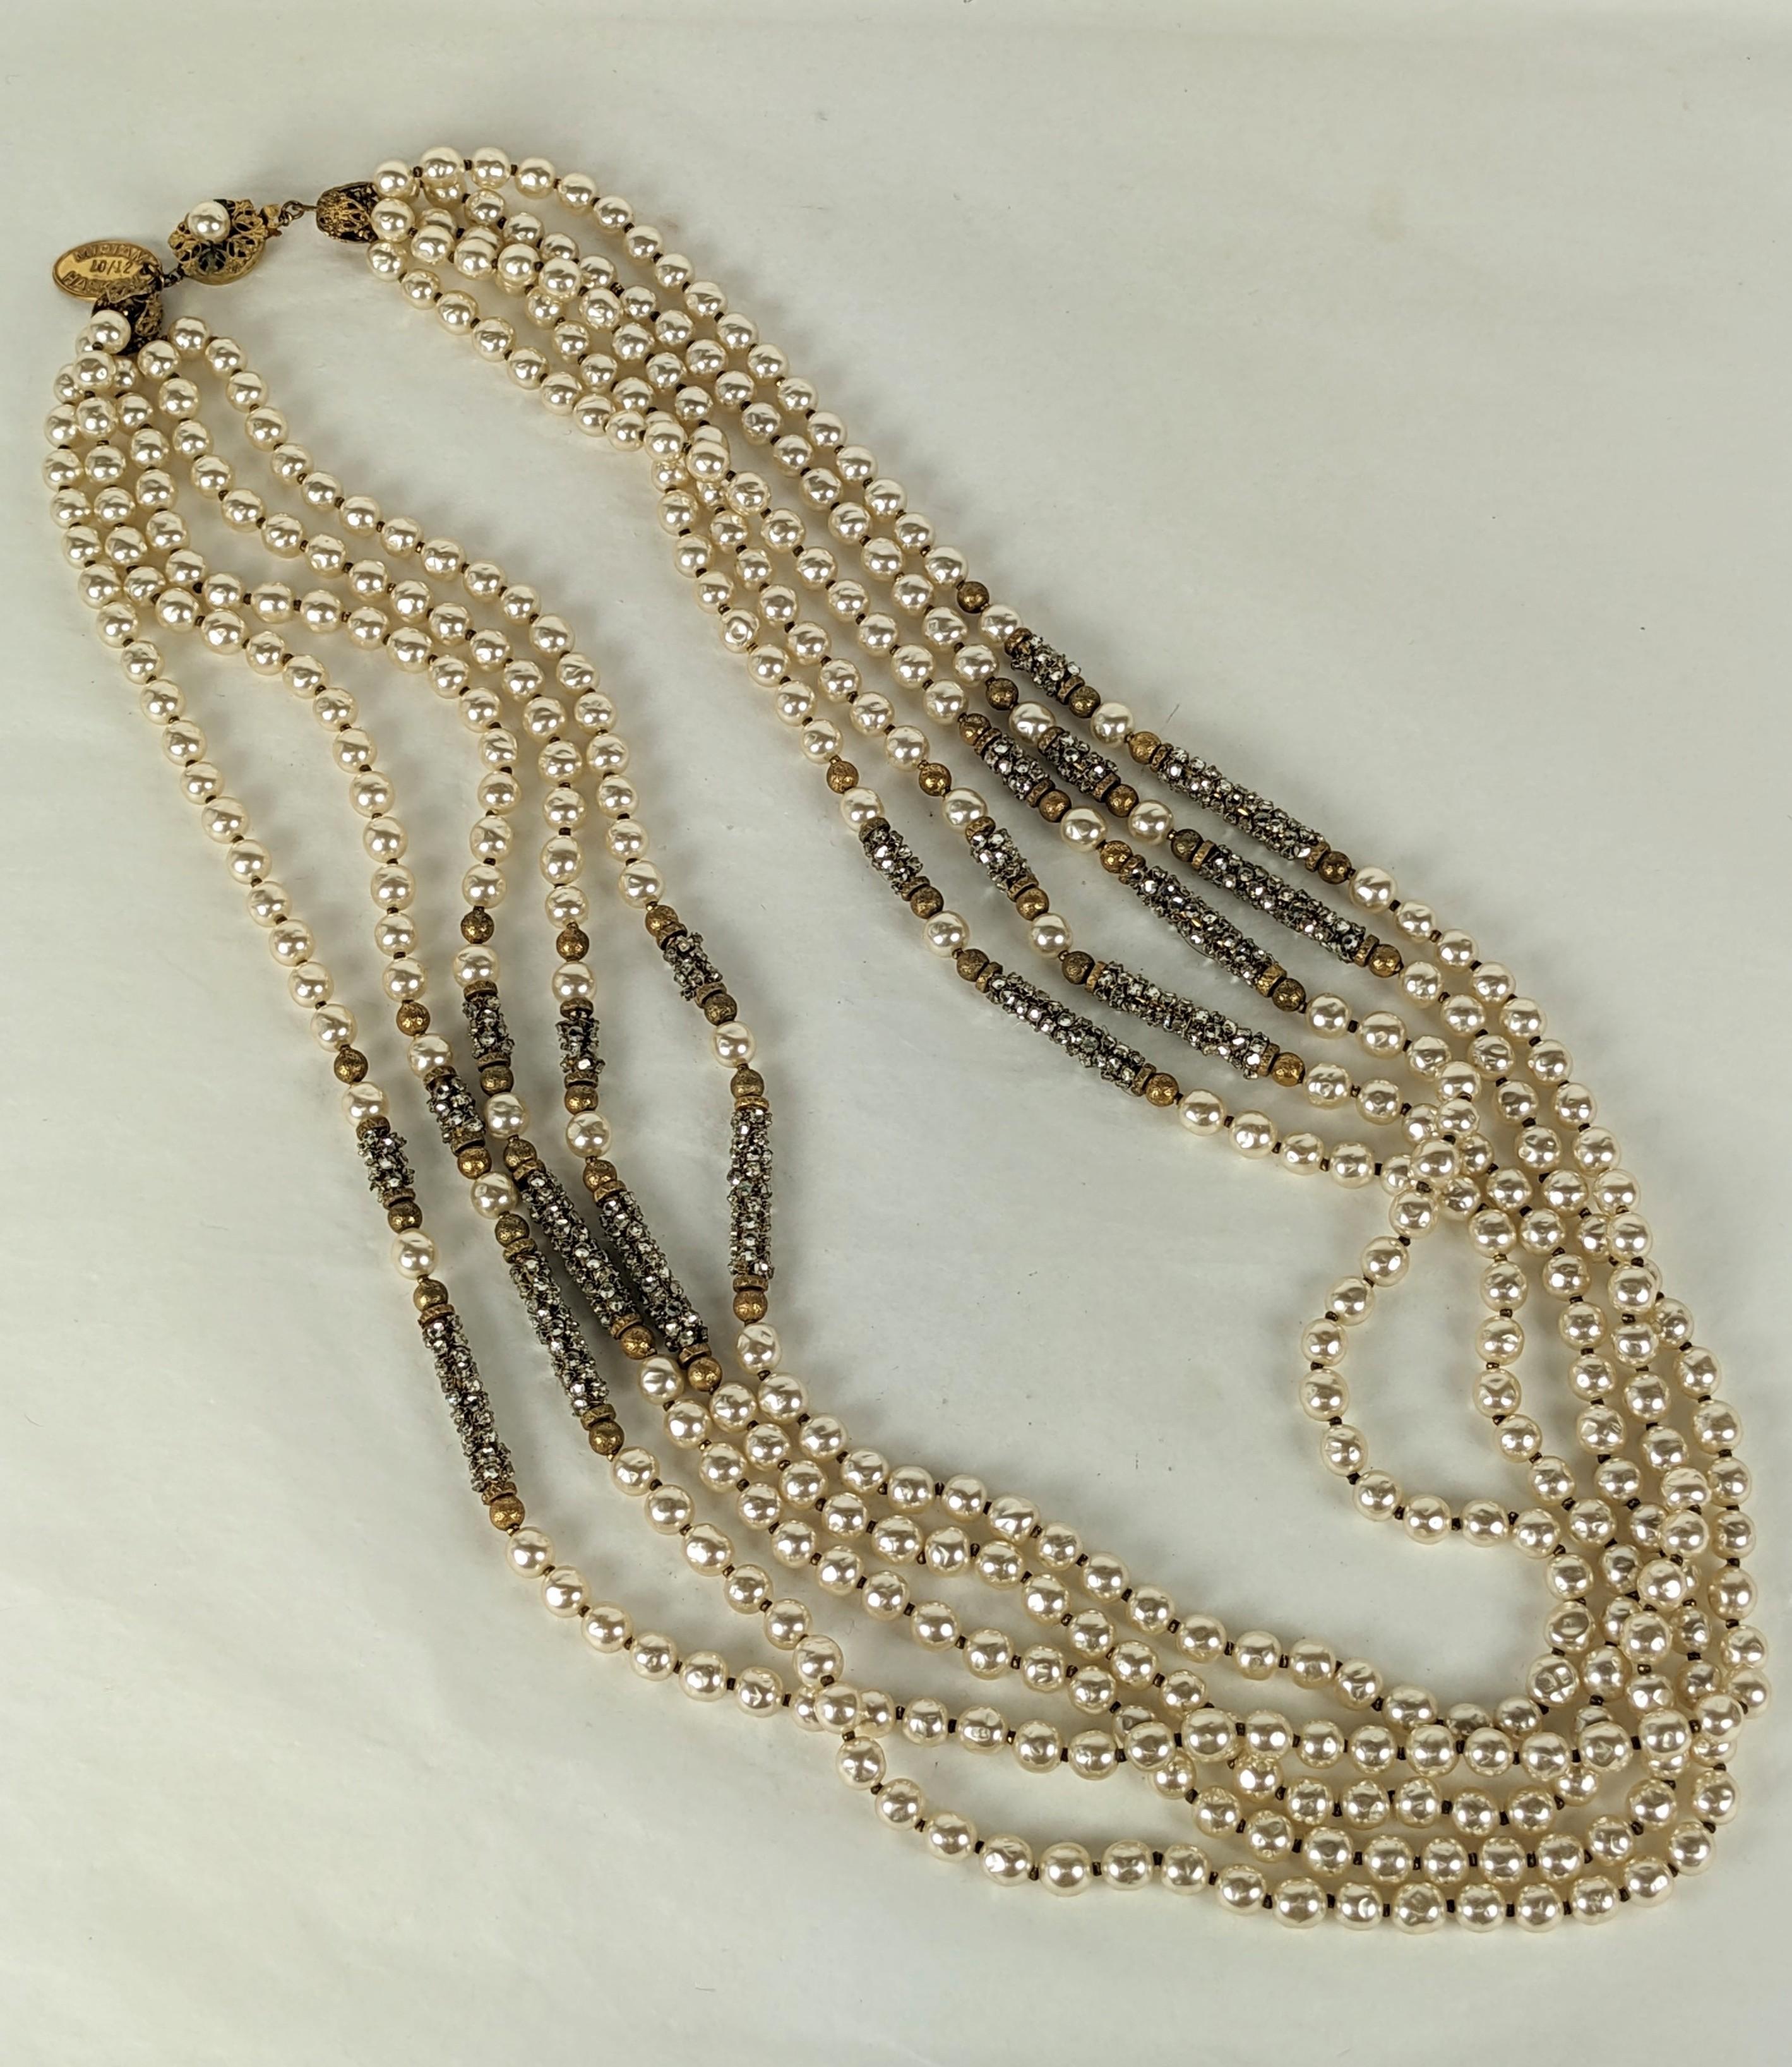 Exceptional Miriam Haskell Pearl and Rose Monte Pave Bar Necklace from the 1980's. This necklace is a reissue of a famous piece by Miriam Haskell from the 1930's. A series of the finest pieces ever produced was reissued in limited editions of 12 and